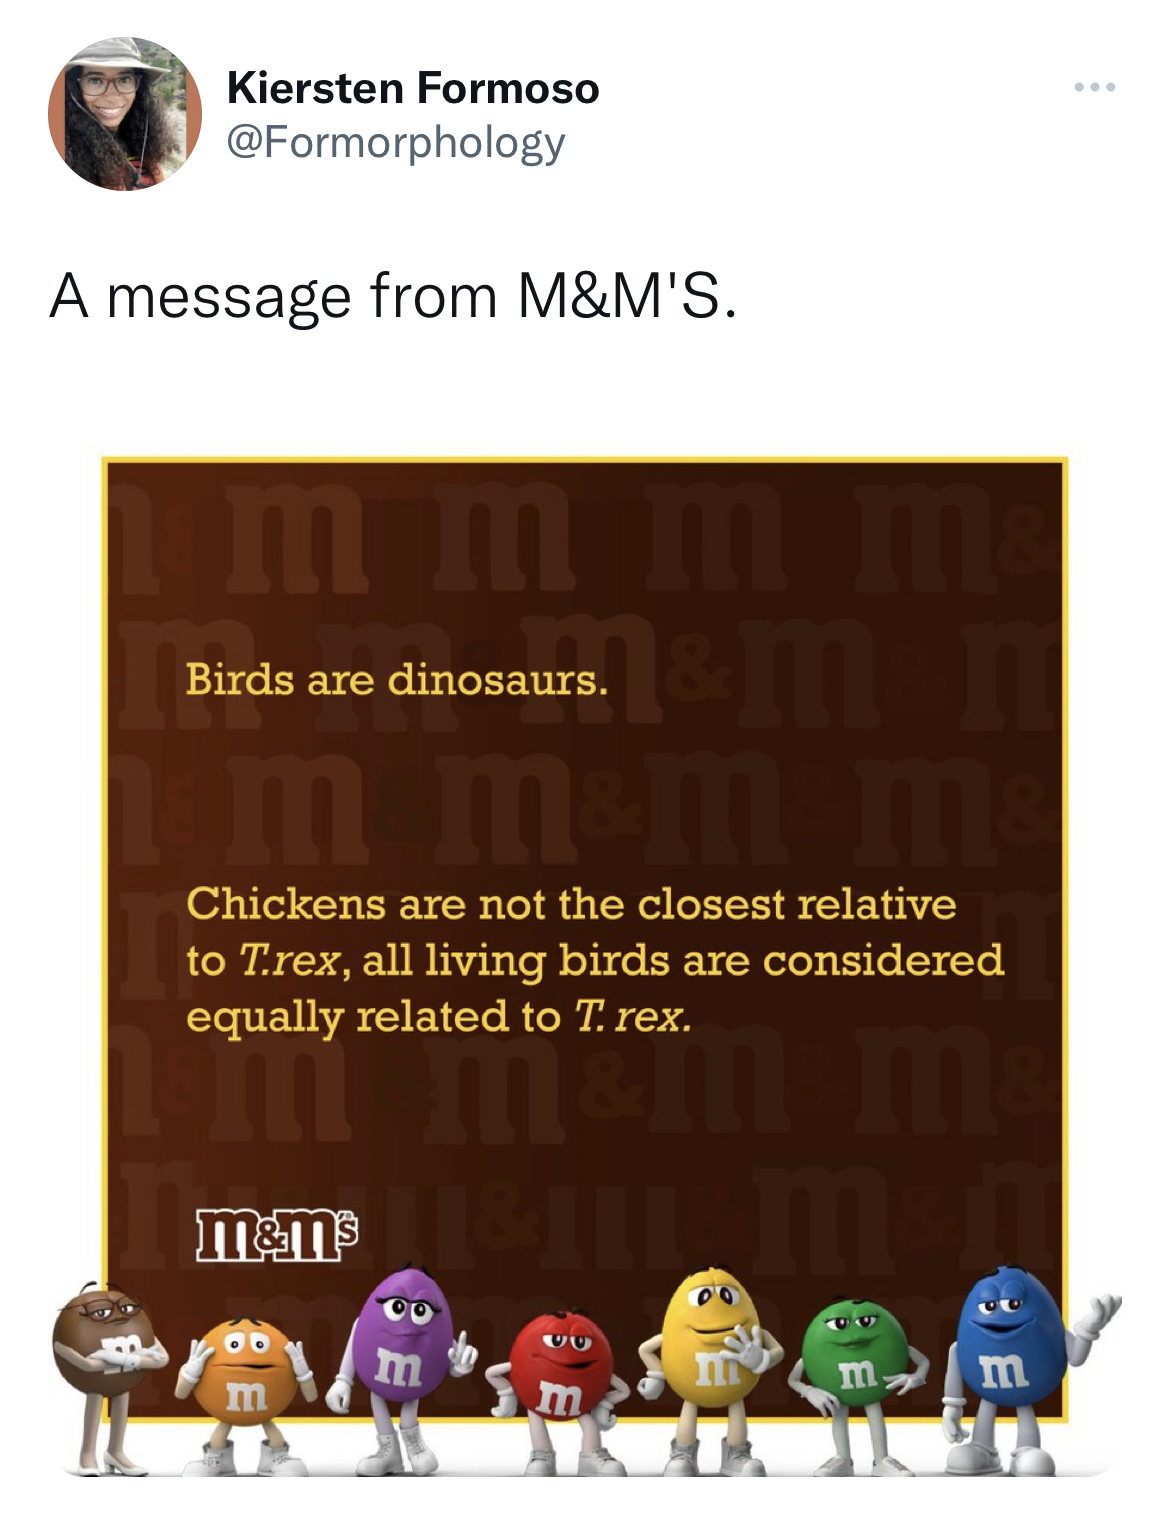 M&M's message spoofs - M&M's - Kiersten Formoso A message from M&M'S. mm ma Birds are dinosaurs. 1 m m&m m Chickens are not the closest relative to T.rex, all living birds are considered equally related to T. rex. mam ma m mm mm A E